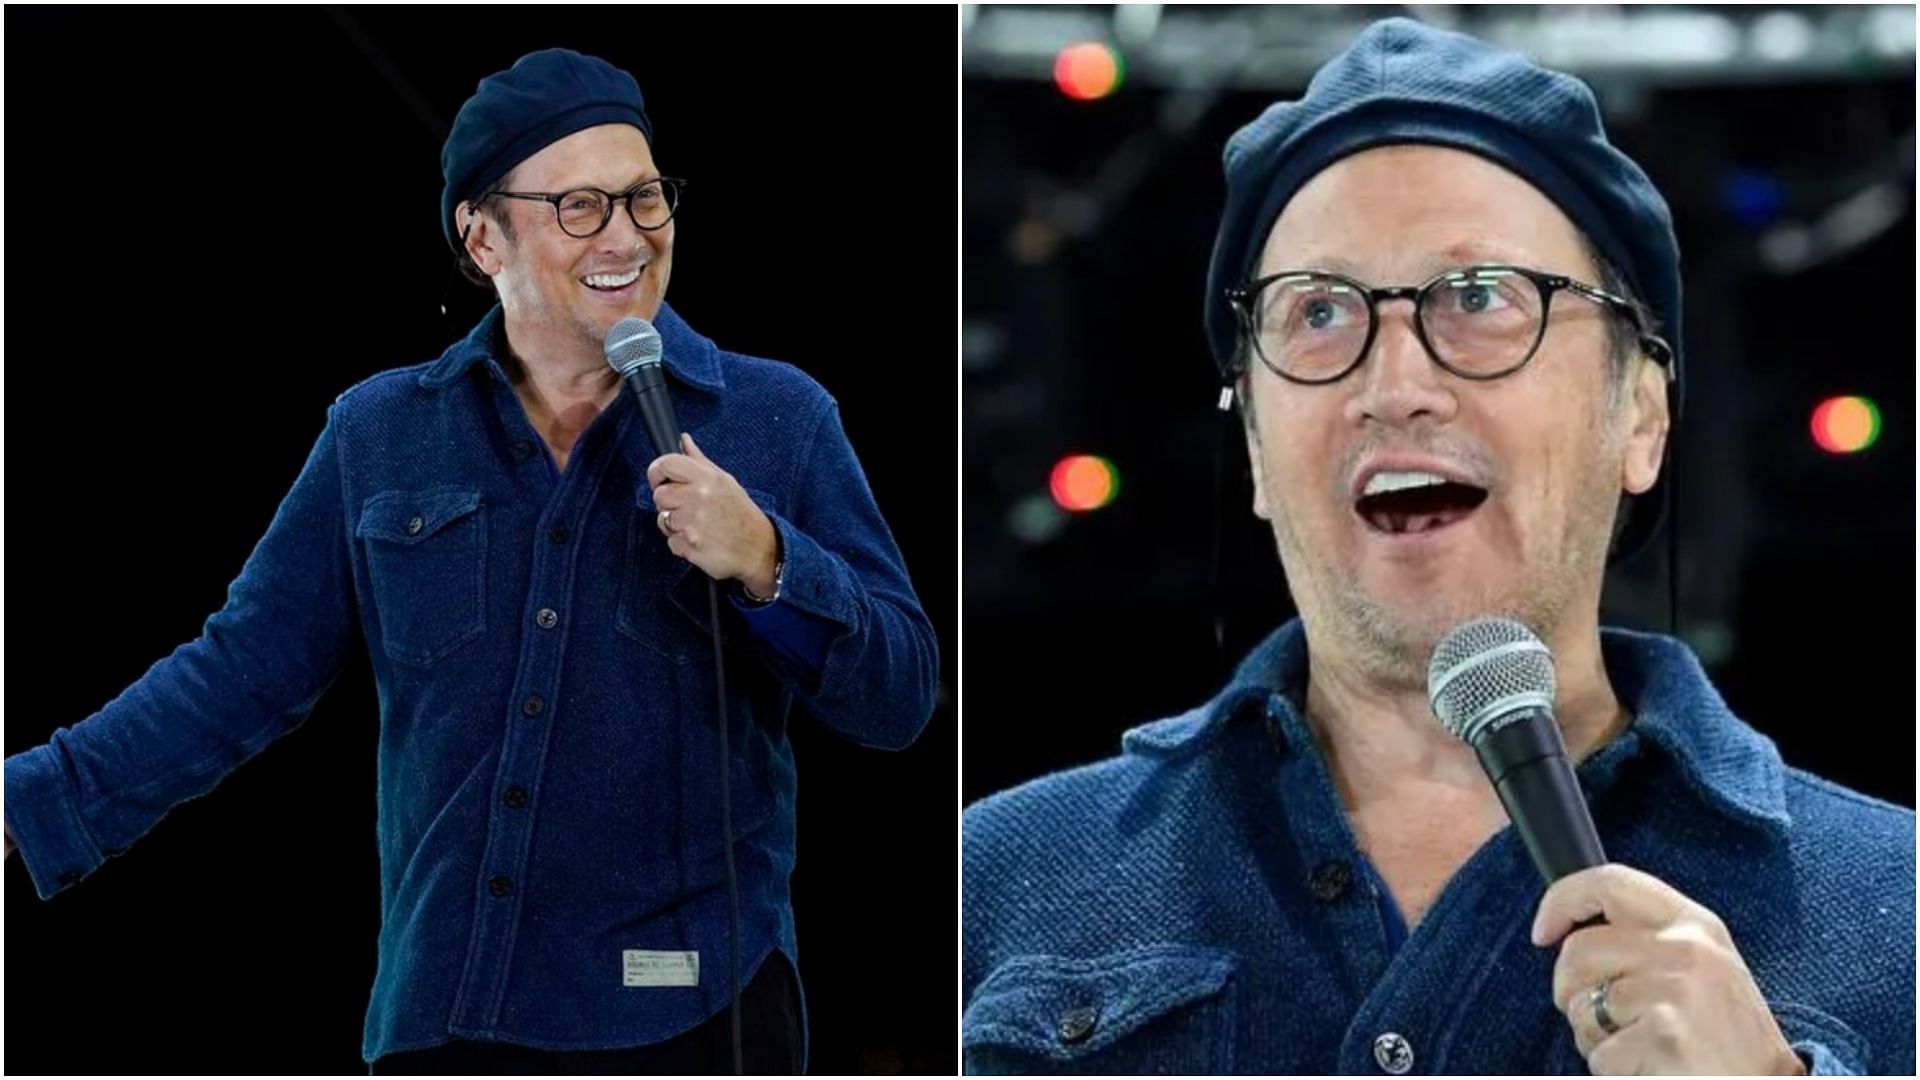 Rob Schneider Tour 2023 Venues, dates, tickets, and more